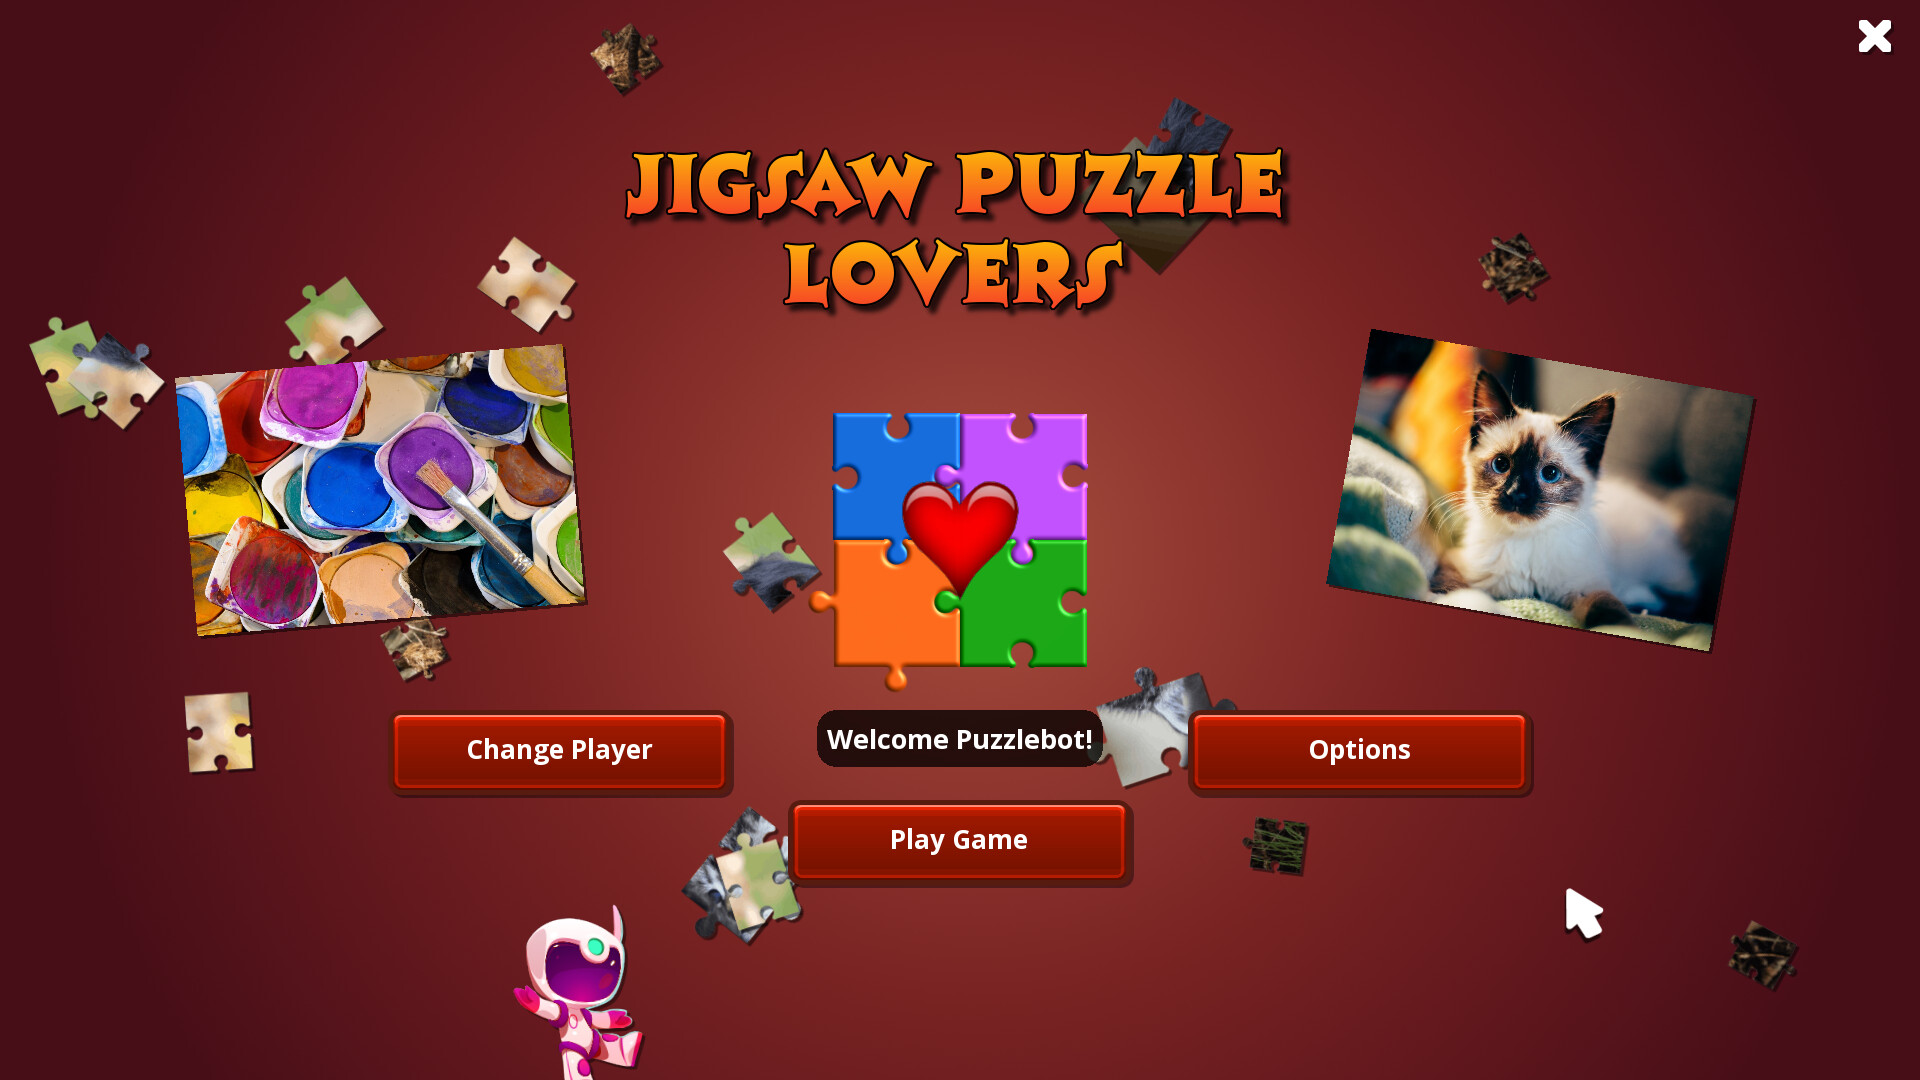 [$ 0.96] Jigsaw Puzzle Lovers Steam CD Key